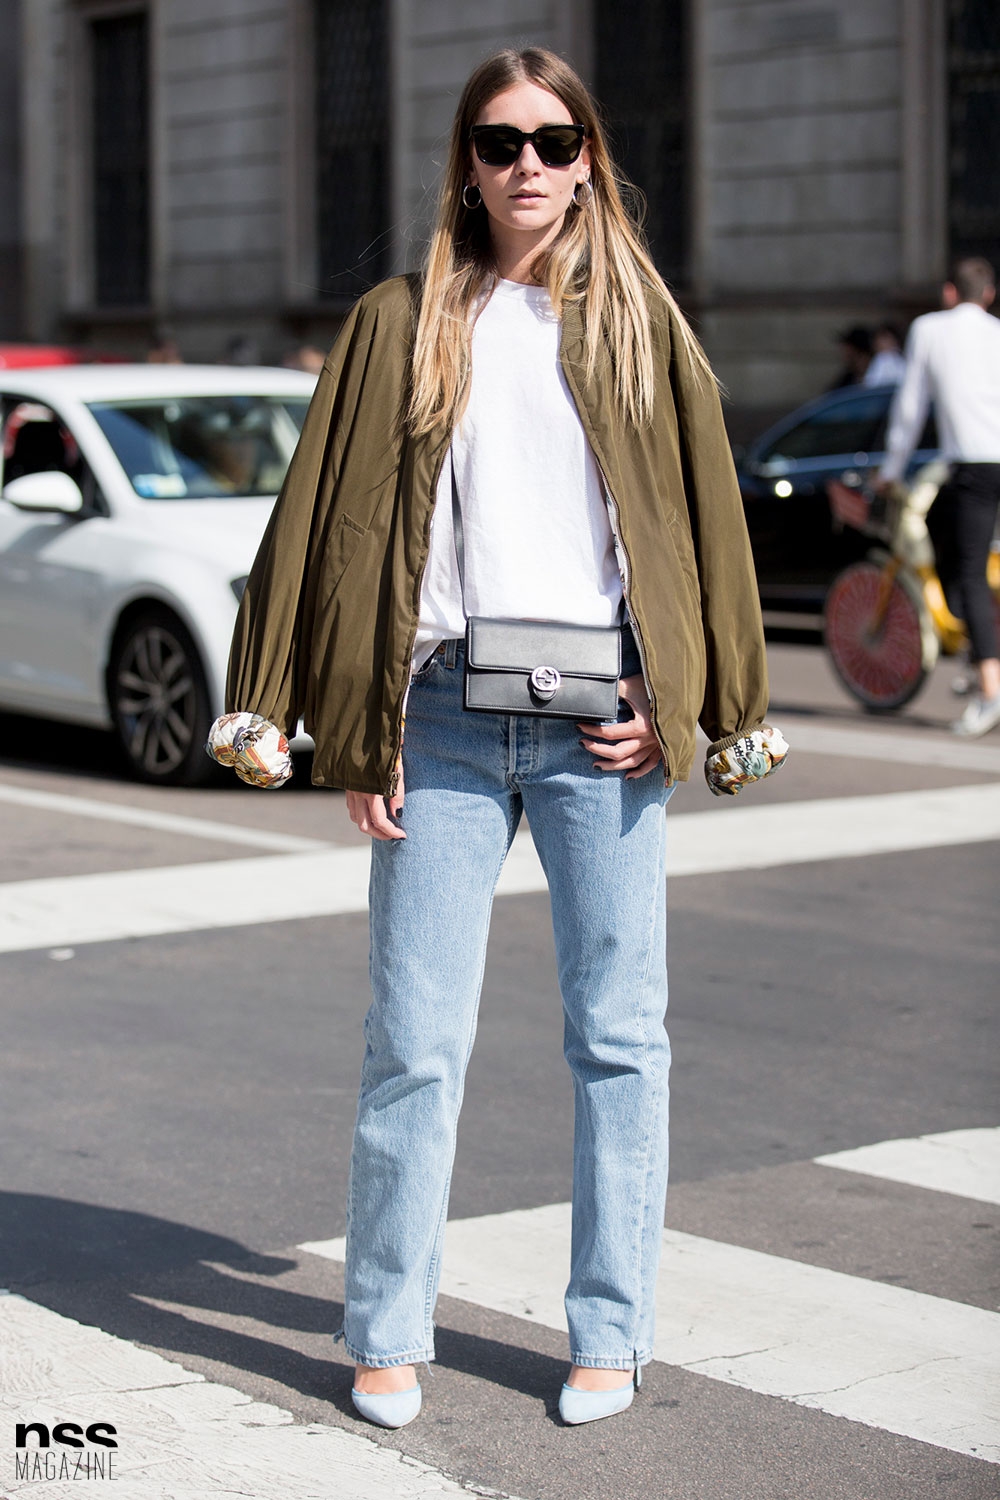 In Fashion: The (Green) Bomber Jacket - Blue is in Fashion this Year